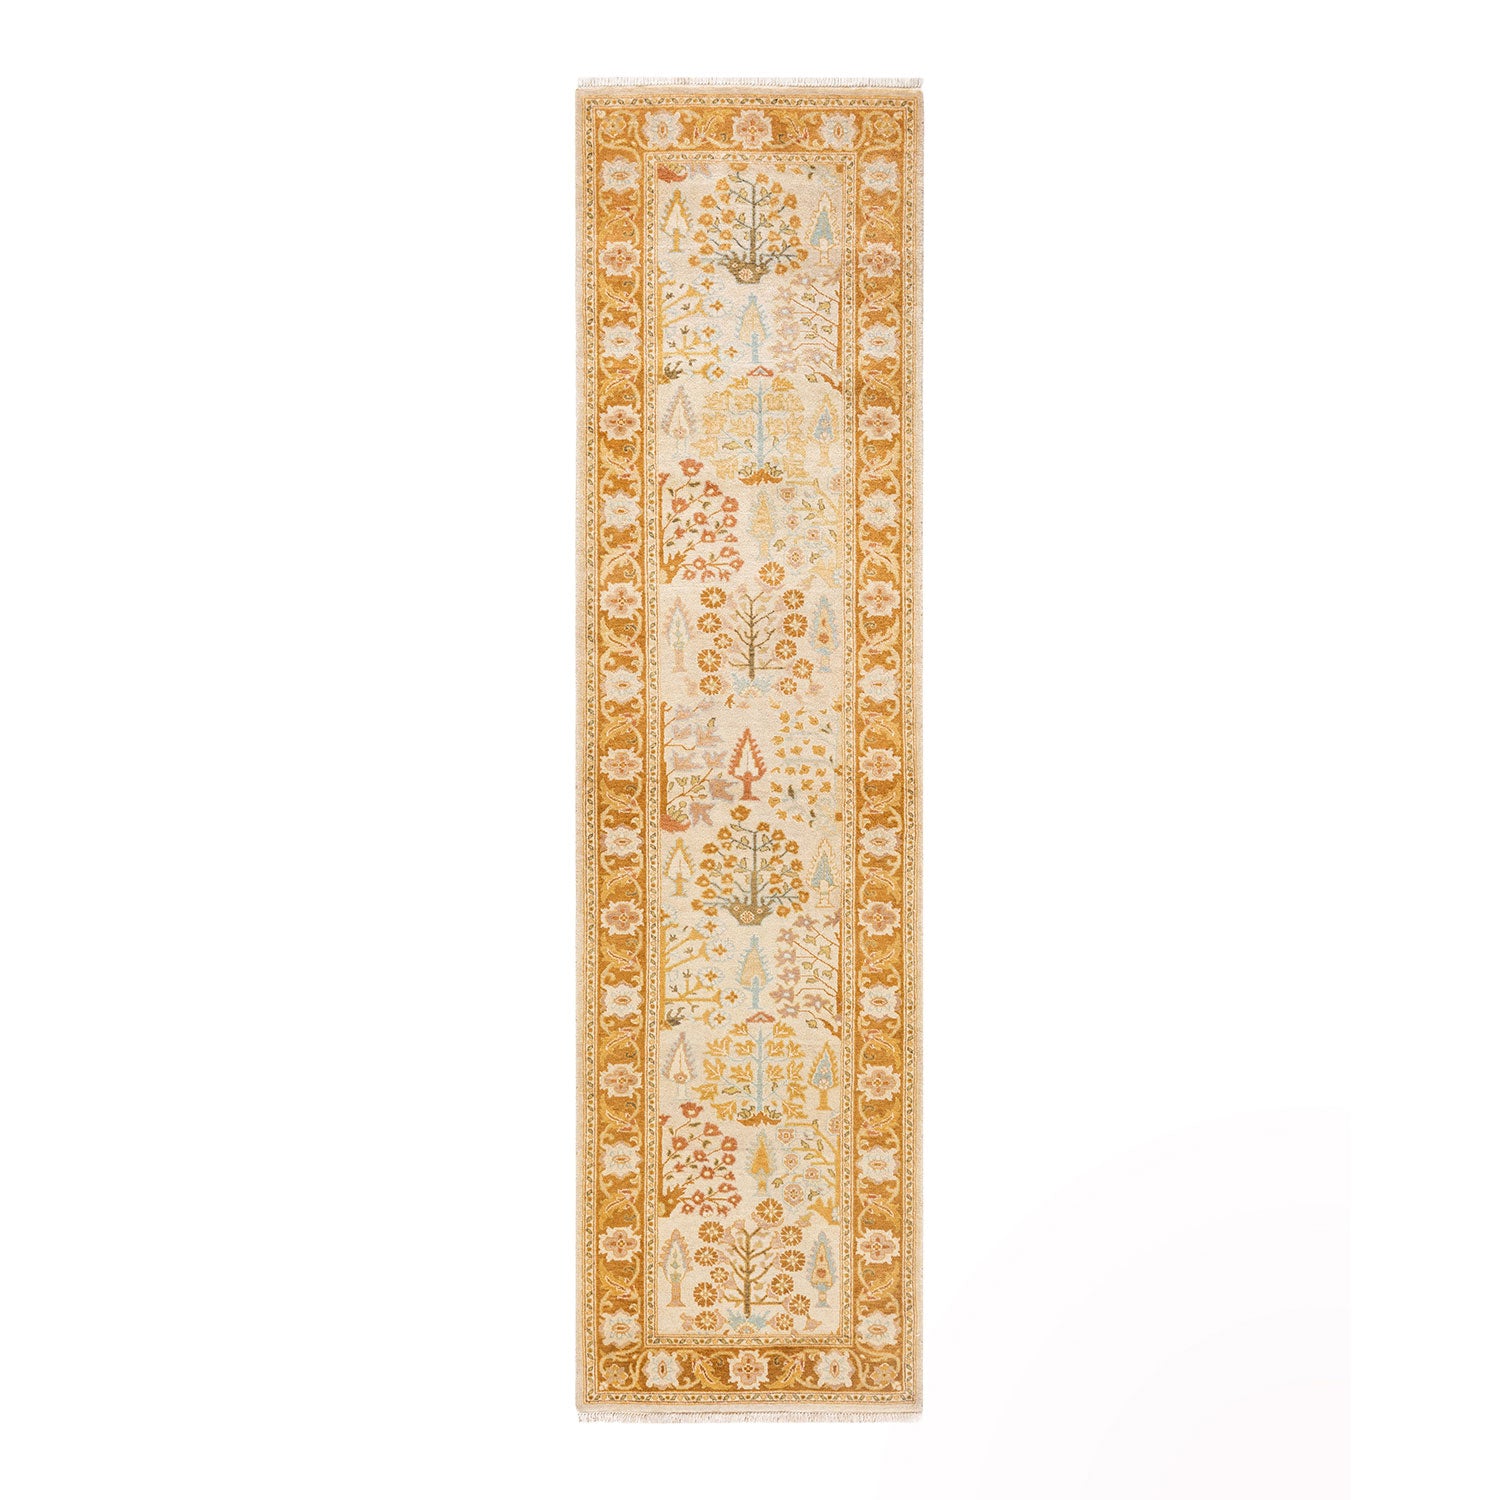 Intricate floral and vegetal motifs adorn a Persian-style runner rug.